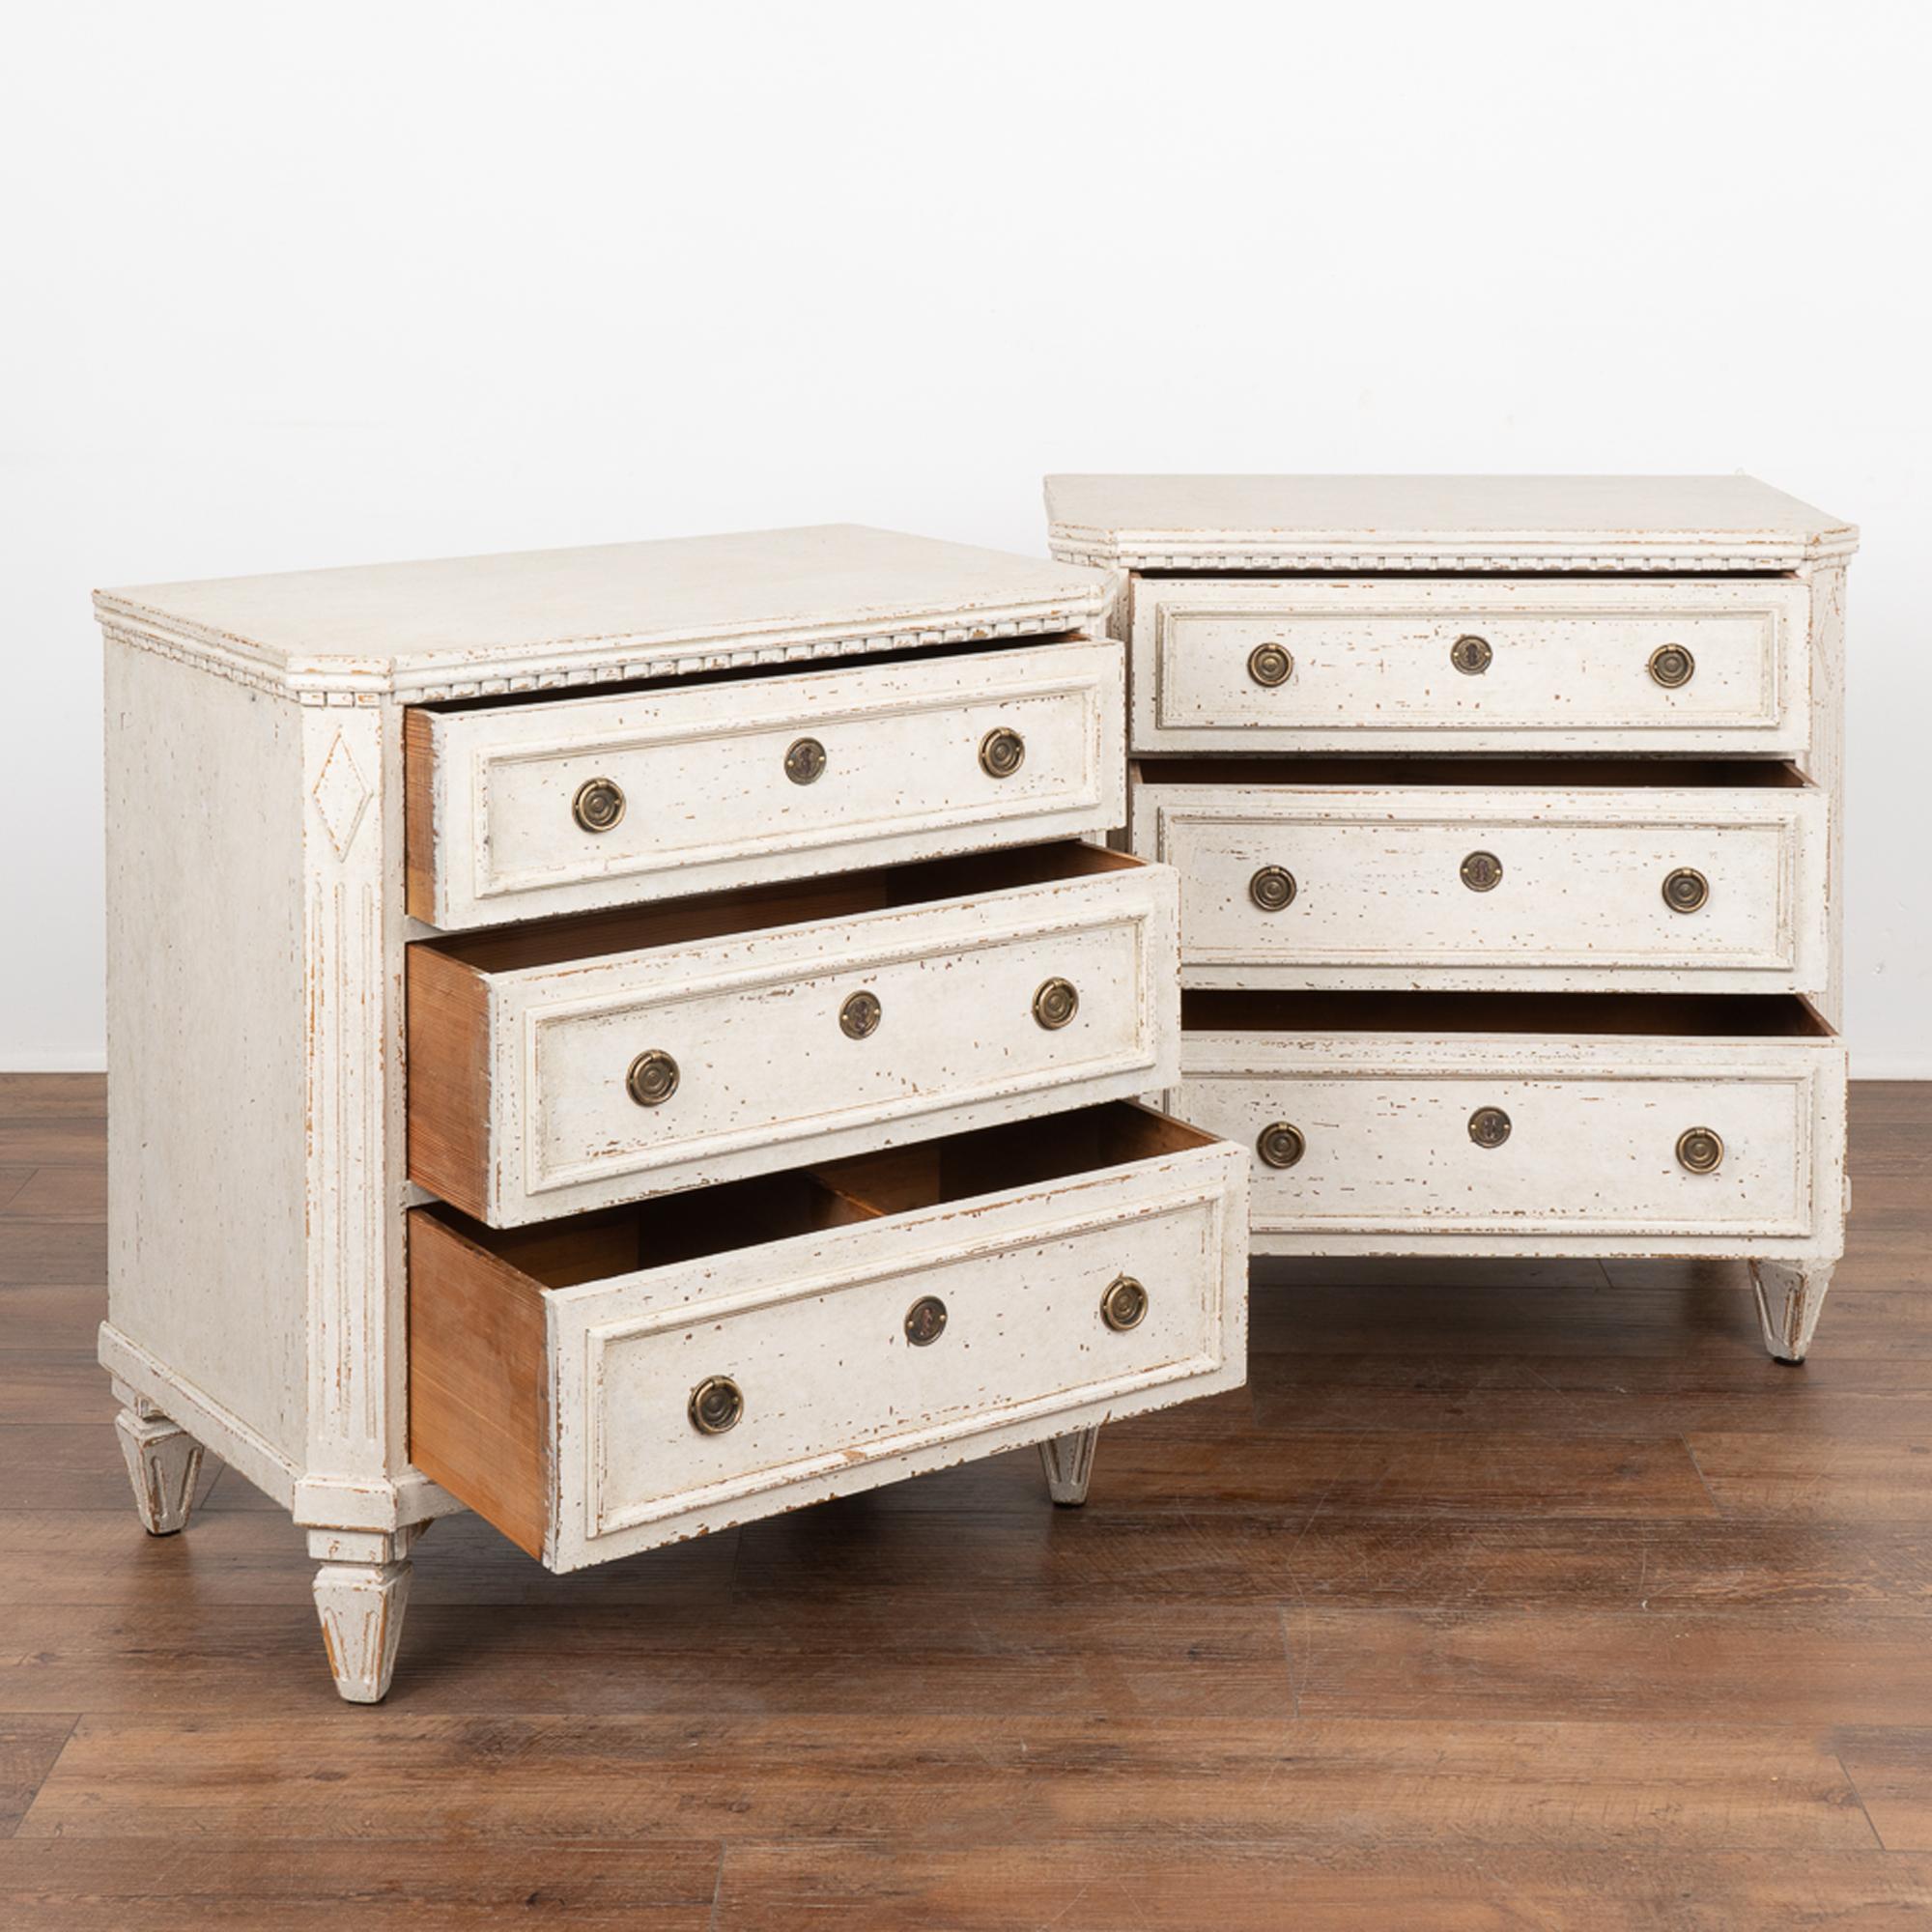 Swedish Pair, Small White Painted Gustavian Chest of Drawers, Sweden circa 1840-60